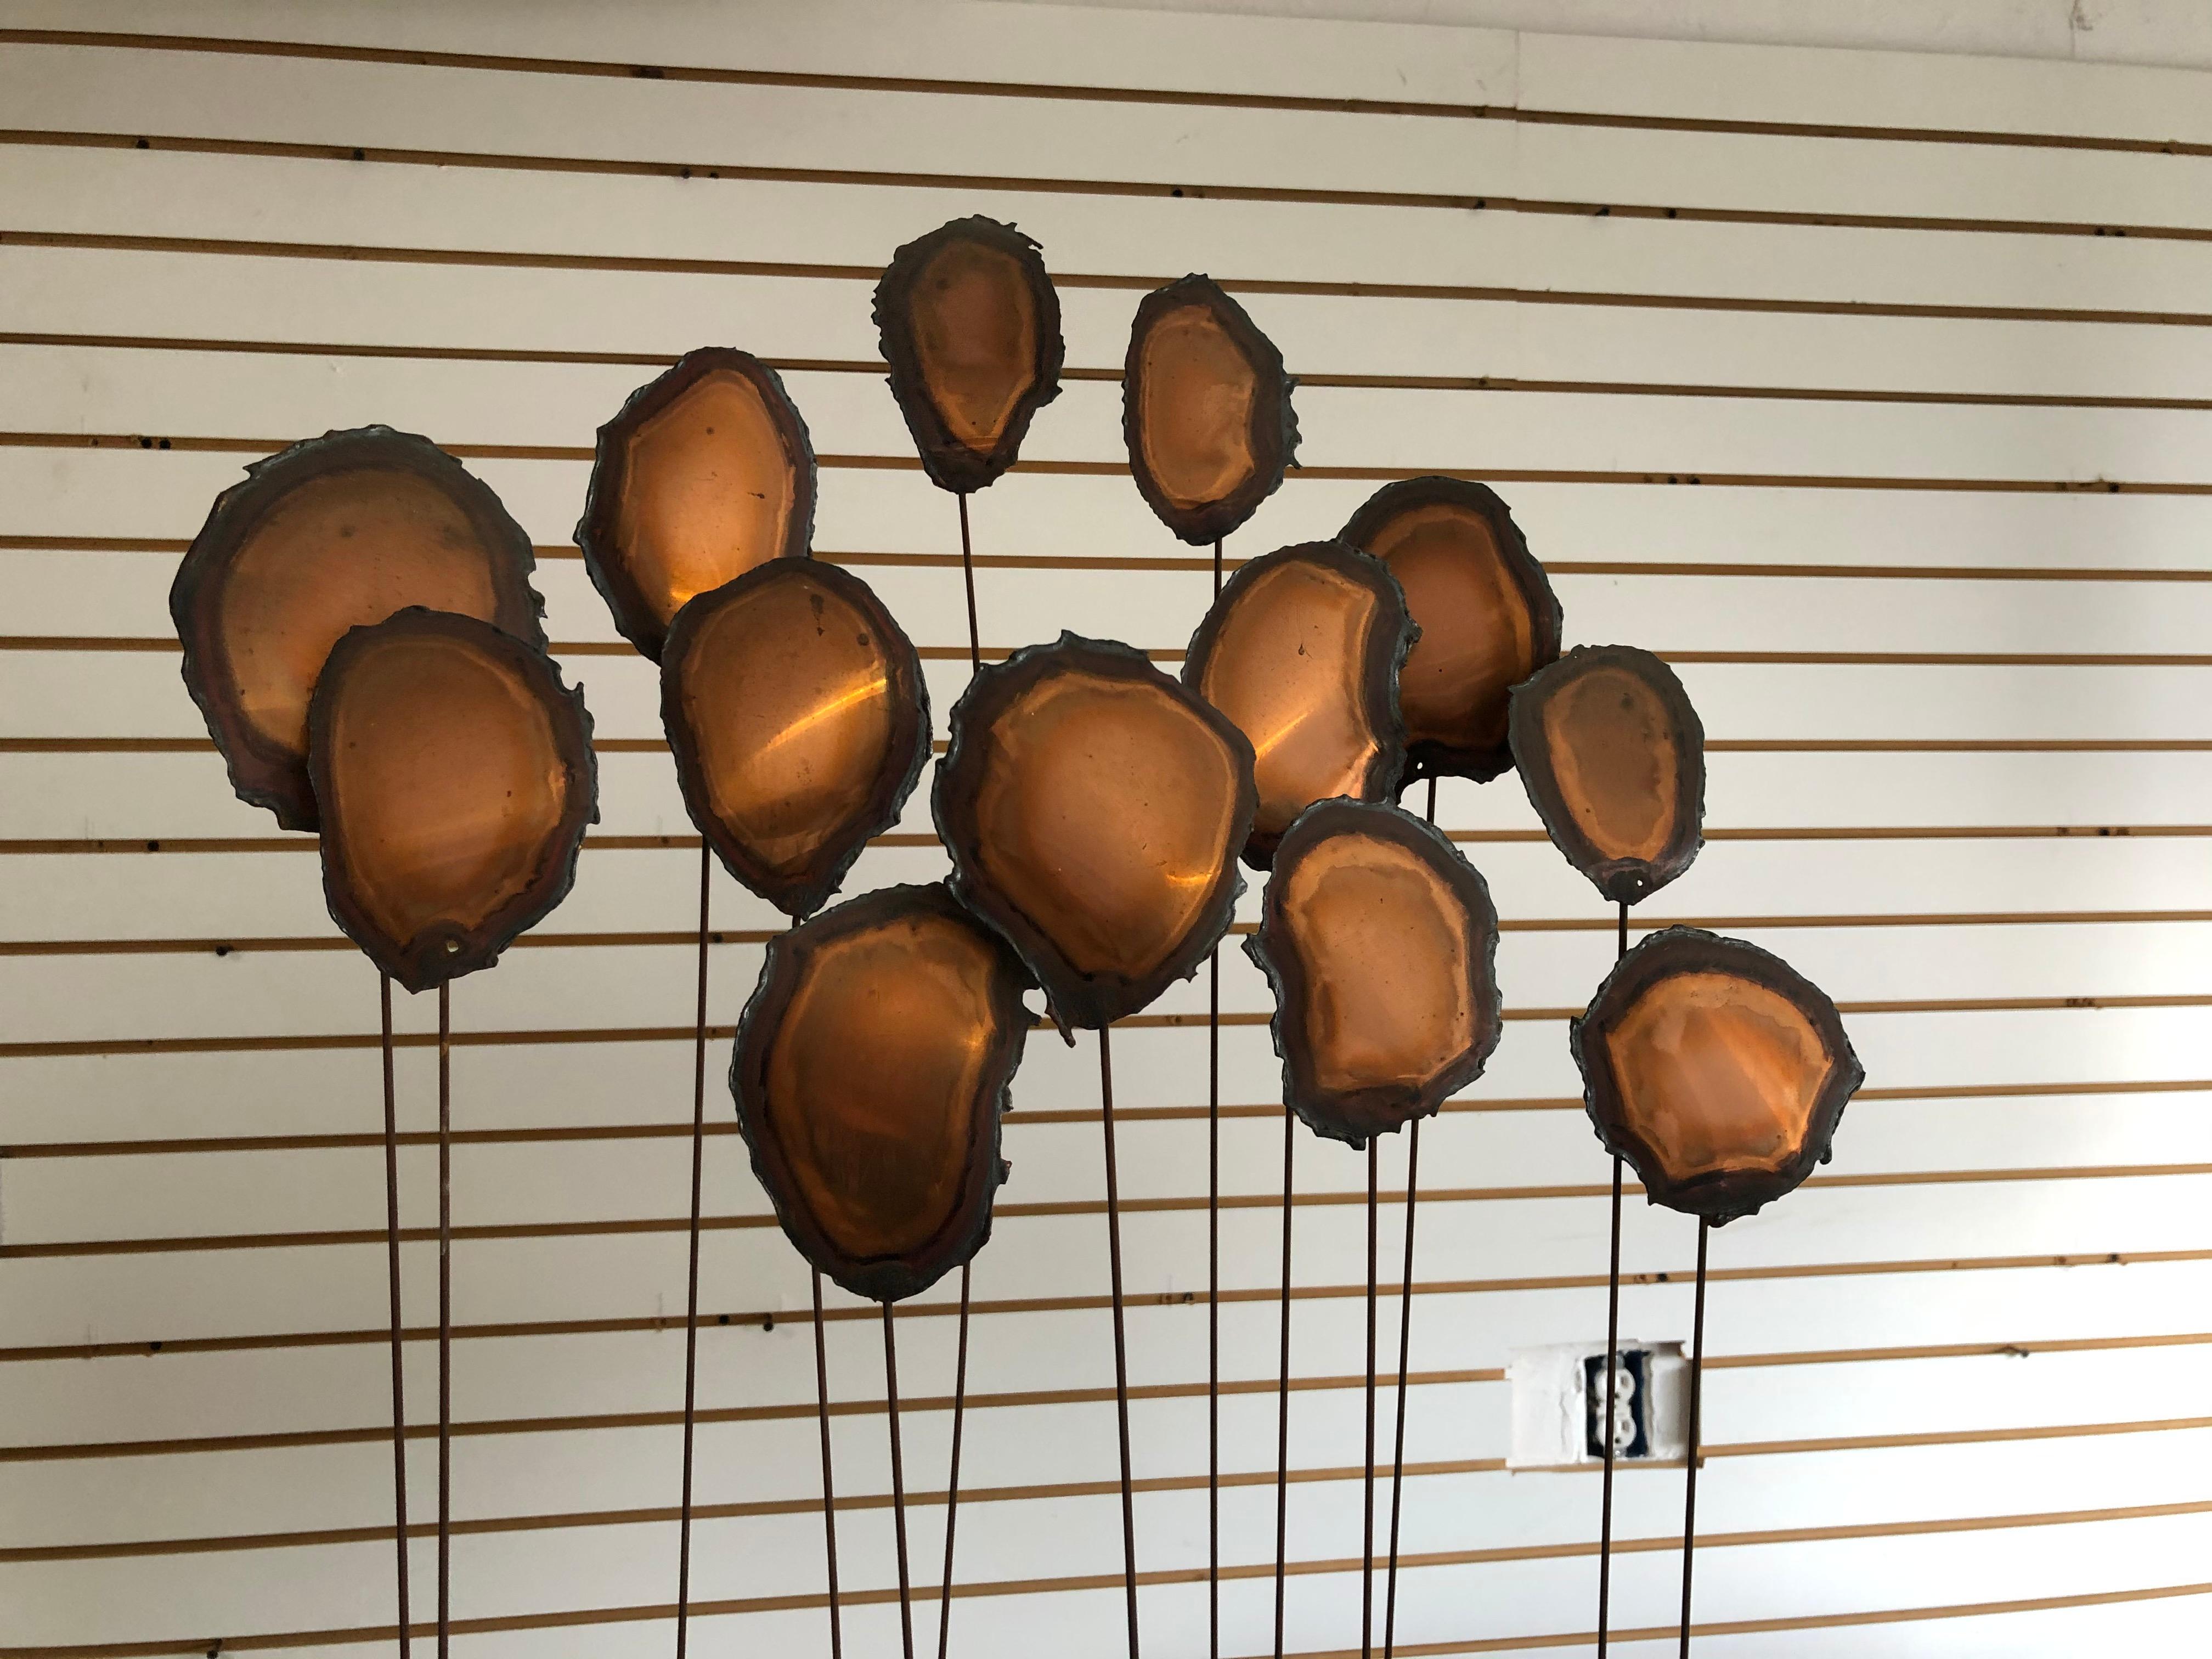 Fantastic intricate brutalist metal sculpture. Most likely from mid 20th century. I feel they could represent flowers while my kids think they are balloons. Looks to be copper and metal measuring approximately 31 inches high by 16 wide. The base is